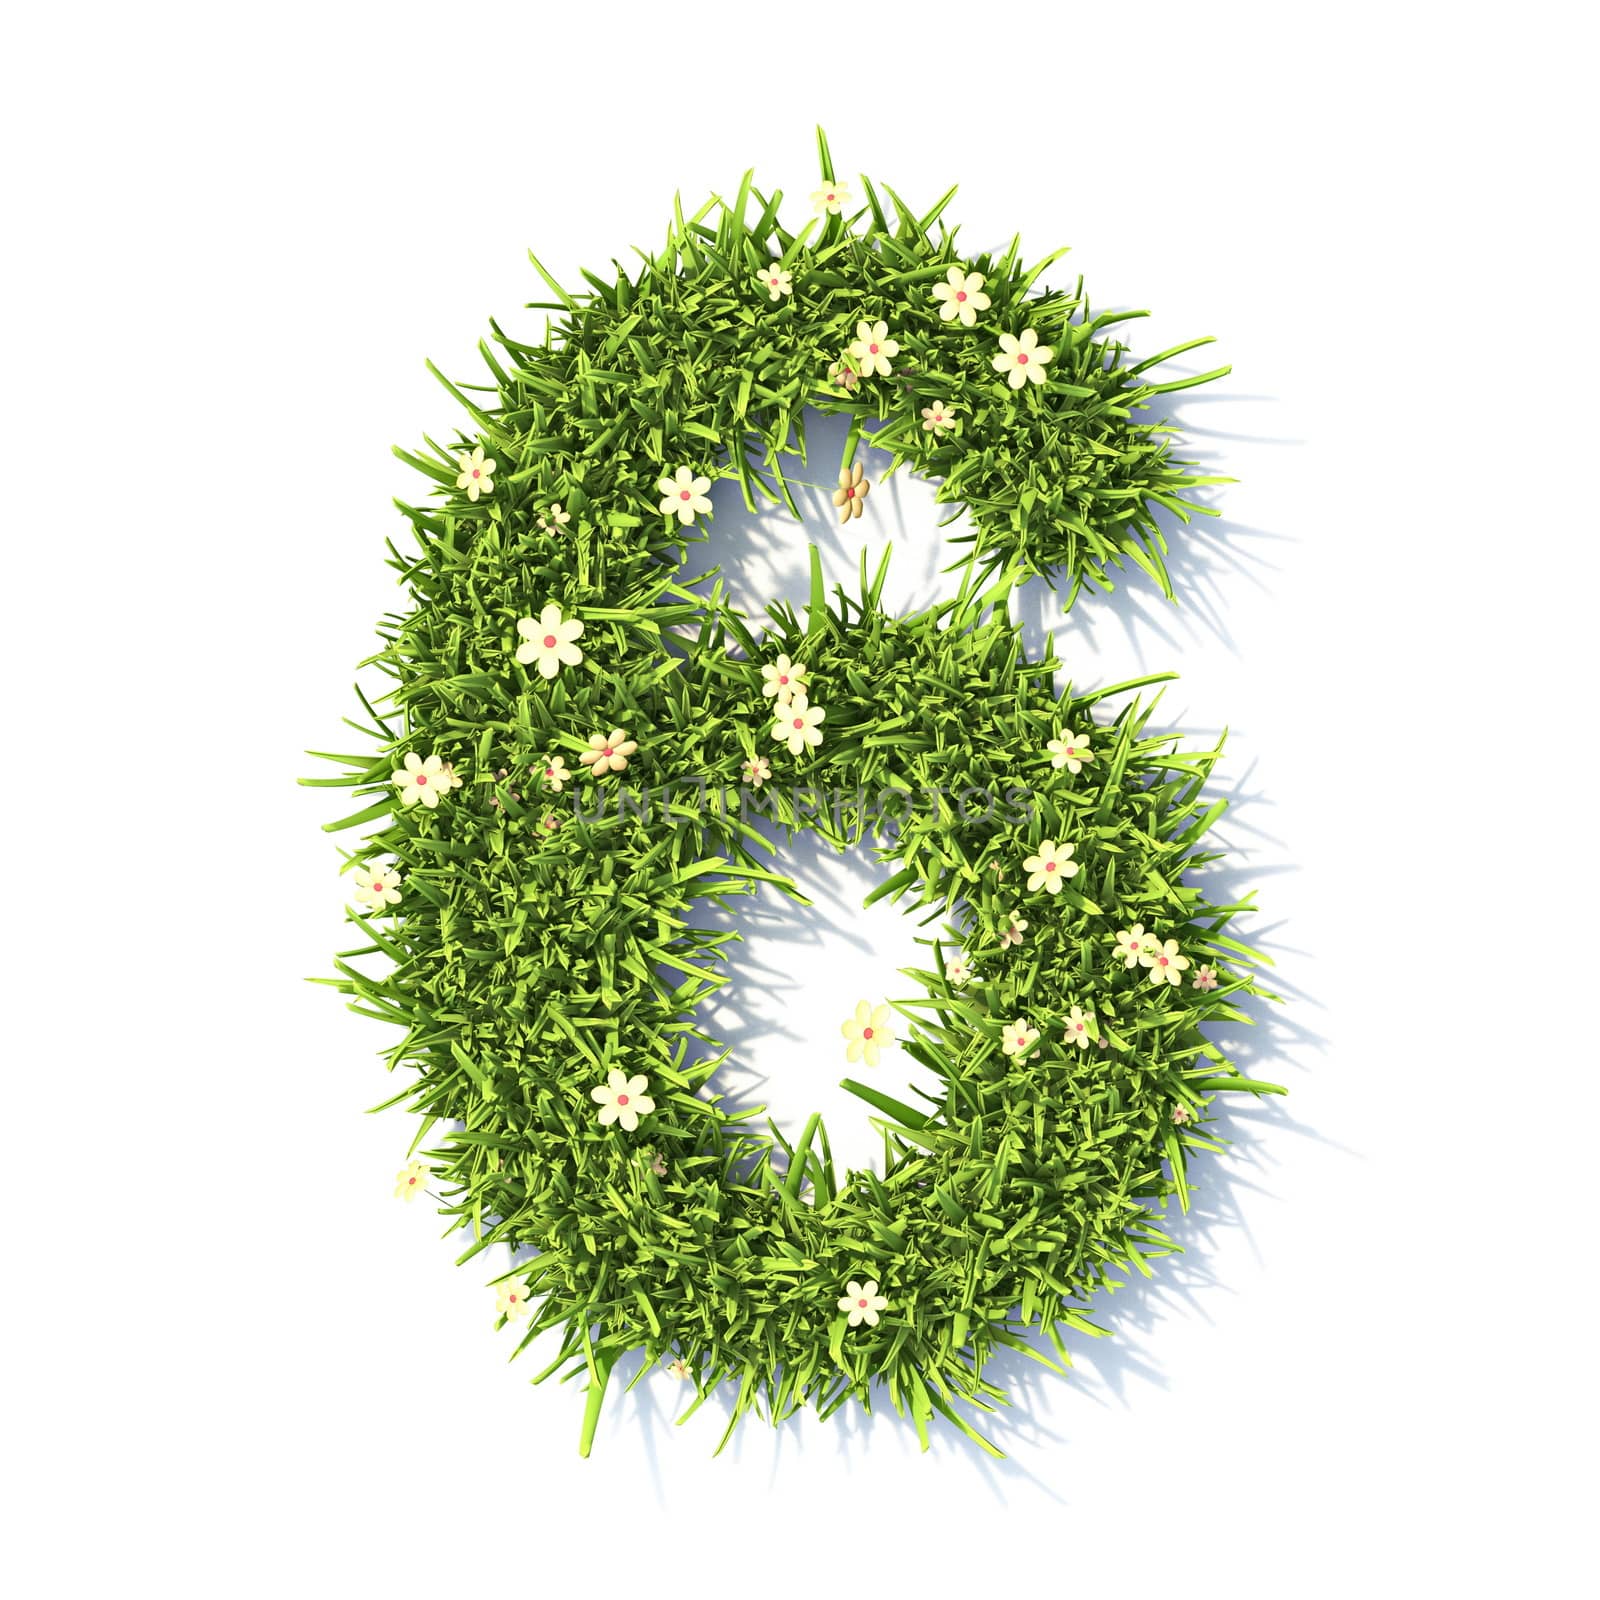 Grass font Number 6 SIX 3D rendering illustration isolated on white background